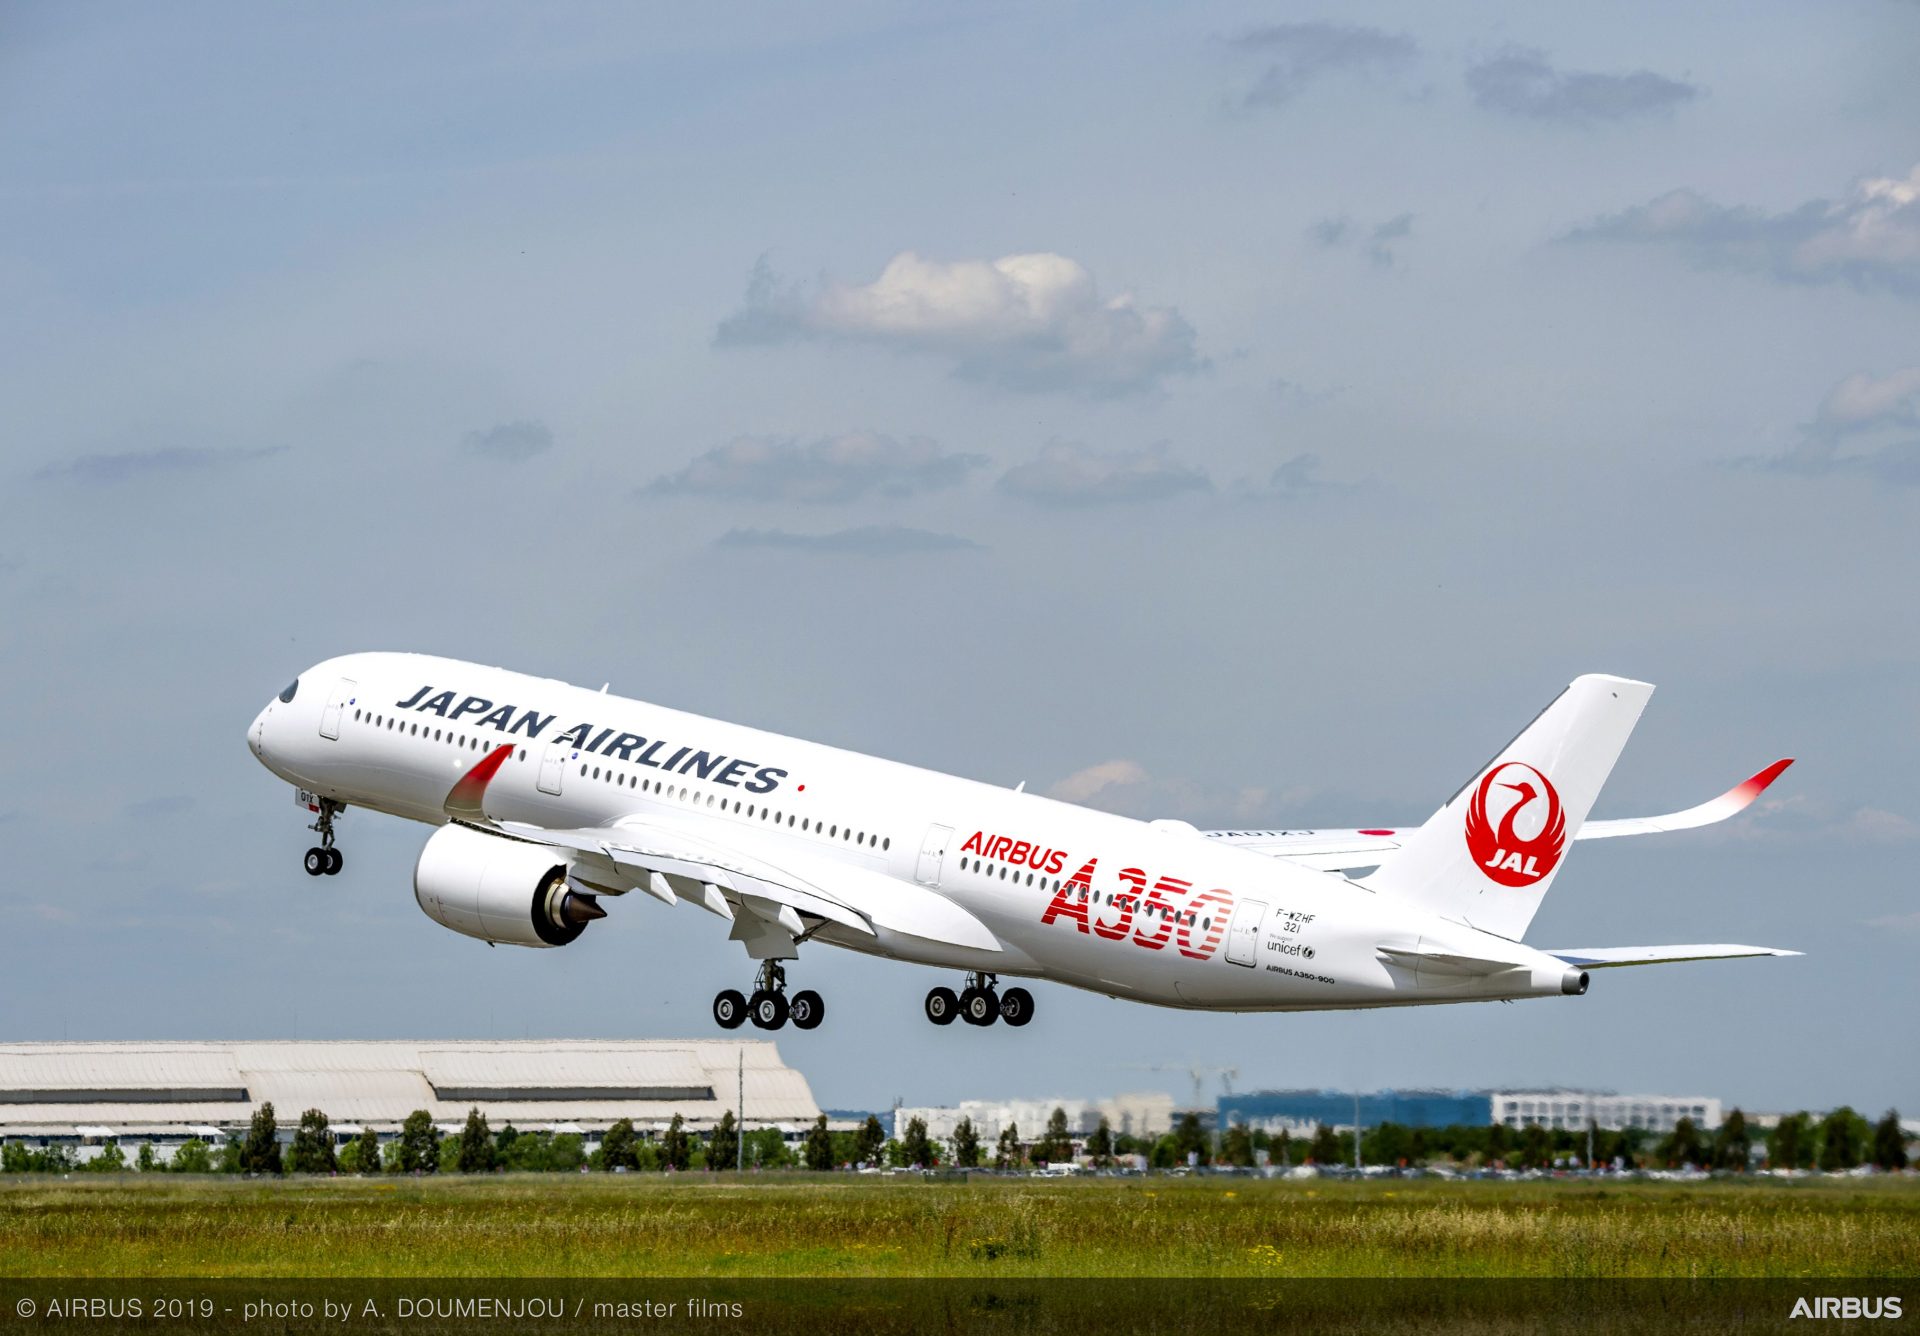 Japan Airlines to introduce 42 new aircraft from Airbus (A350 and A321neo) and Boeing (787-9)